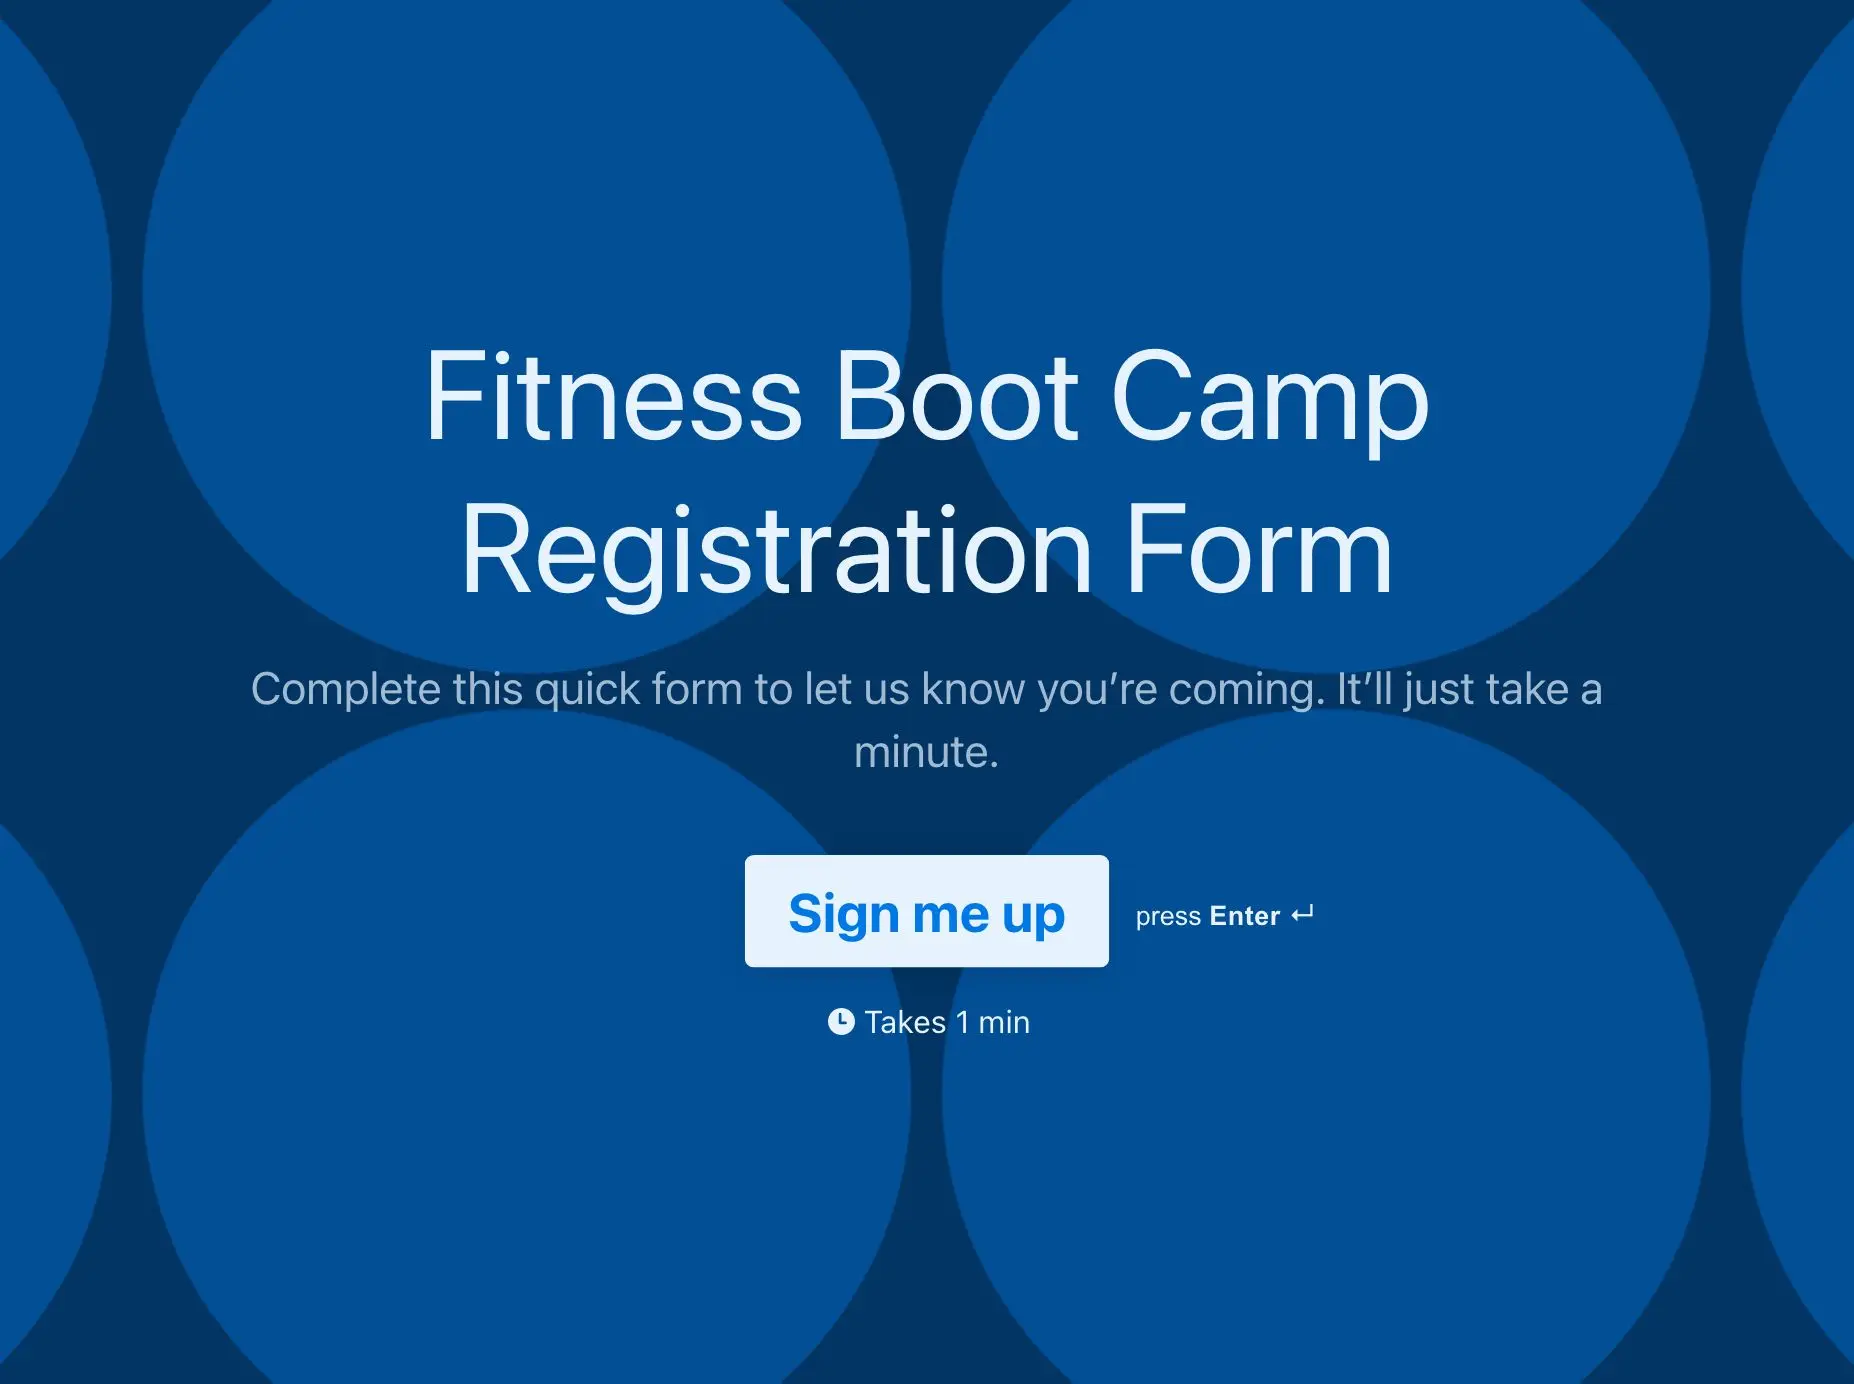 Fitness Boot Camp Registration Form Template Hero